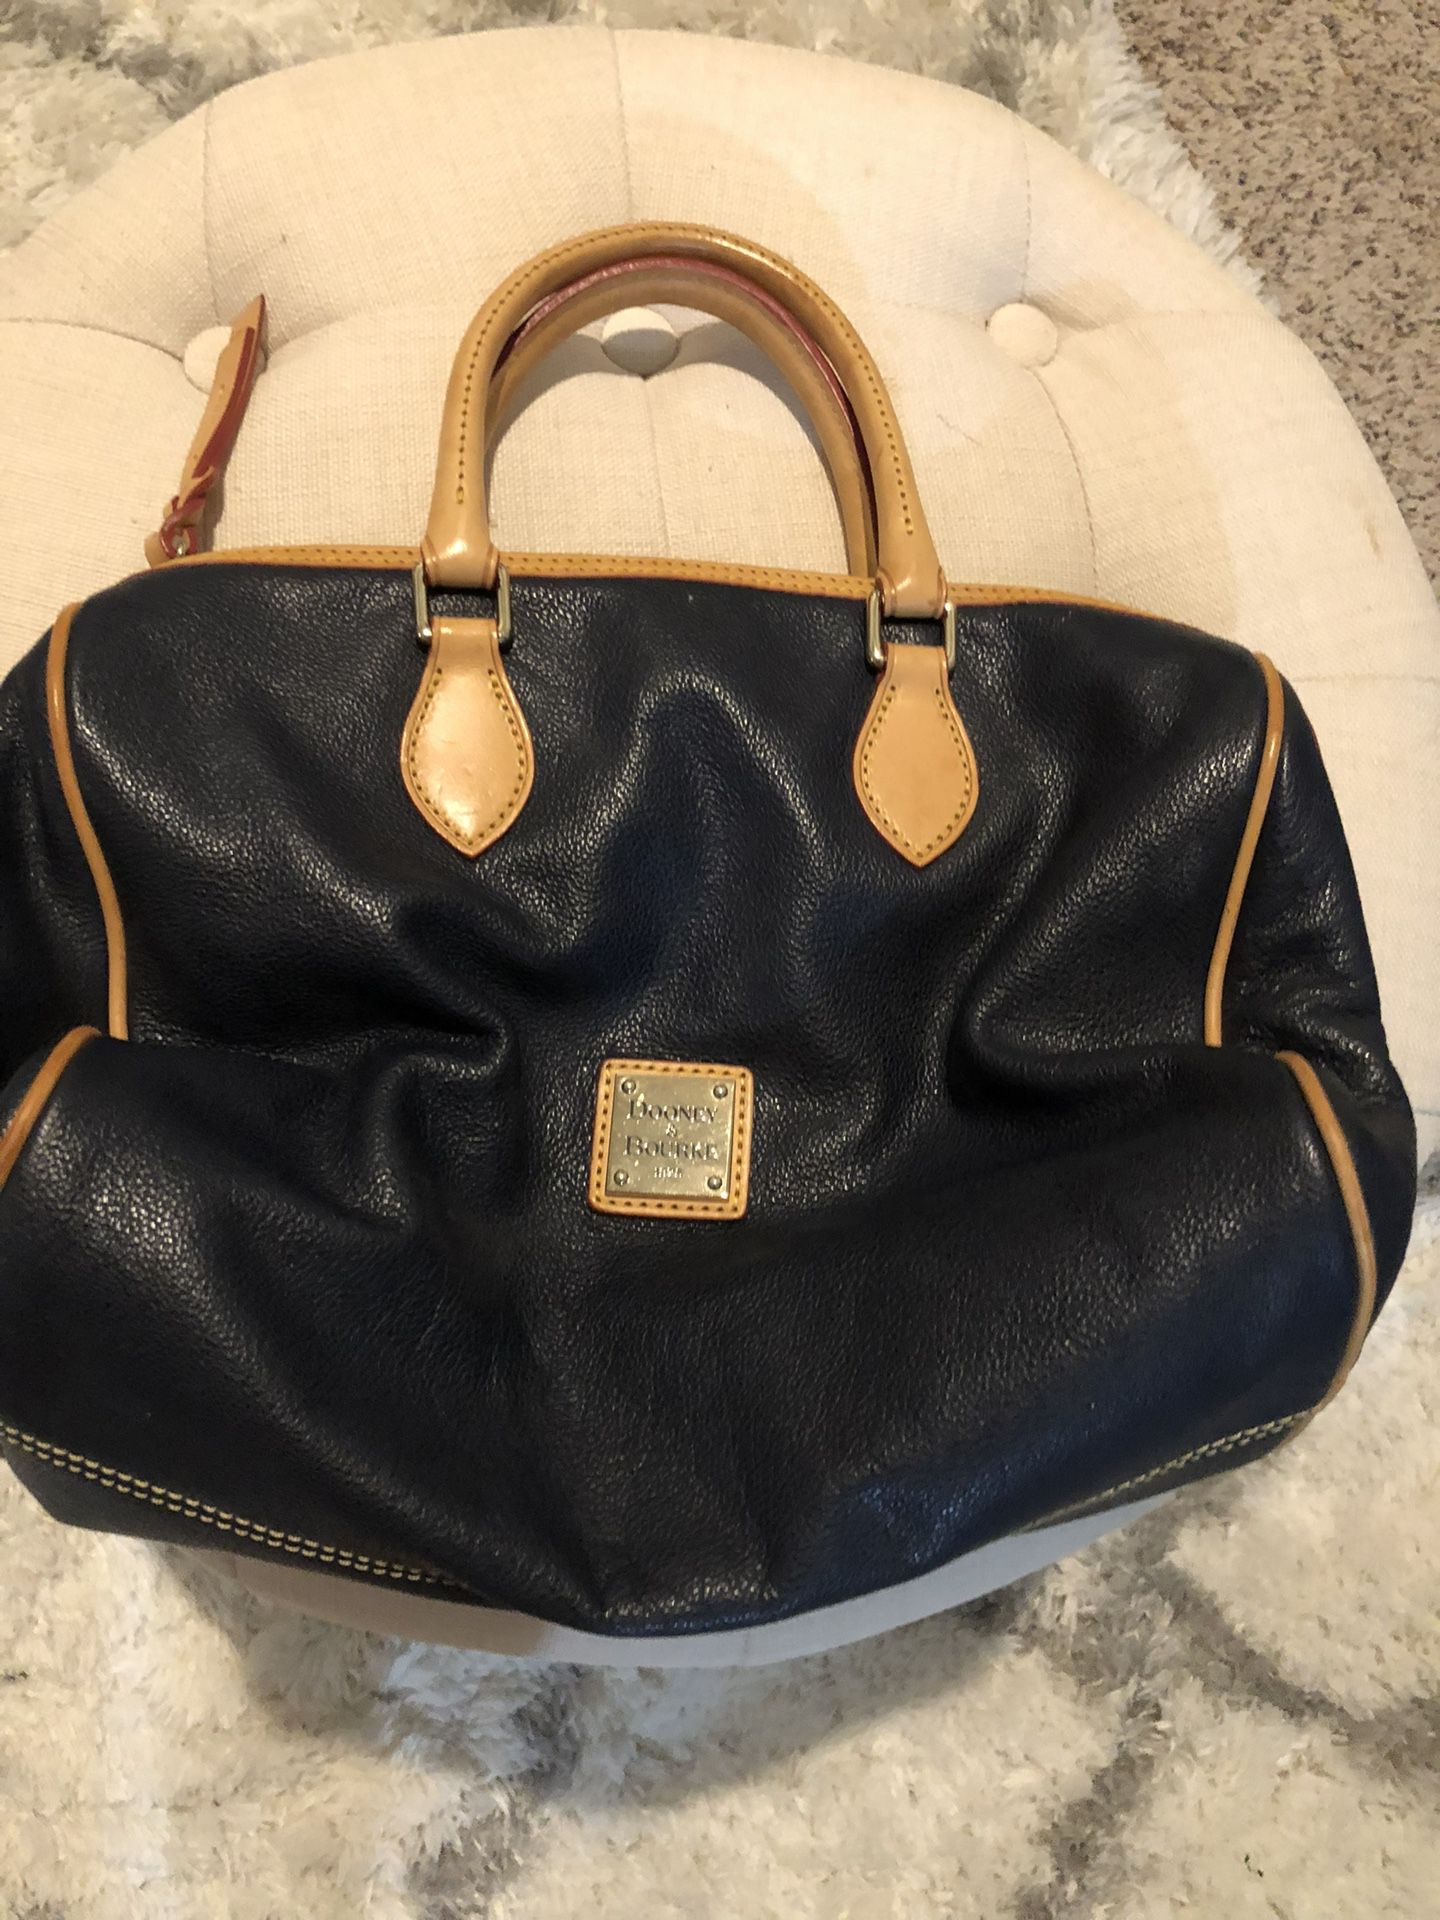 Dooney And Burke Purse Real 